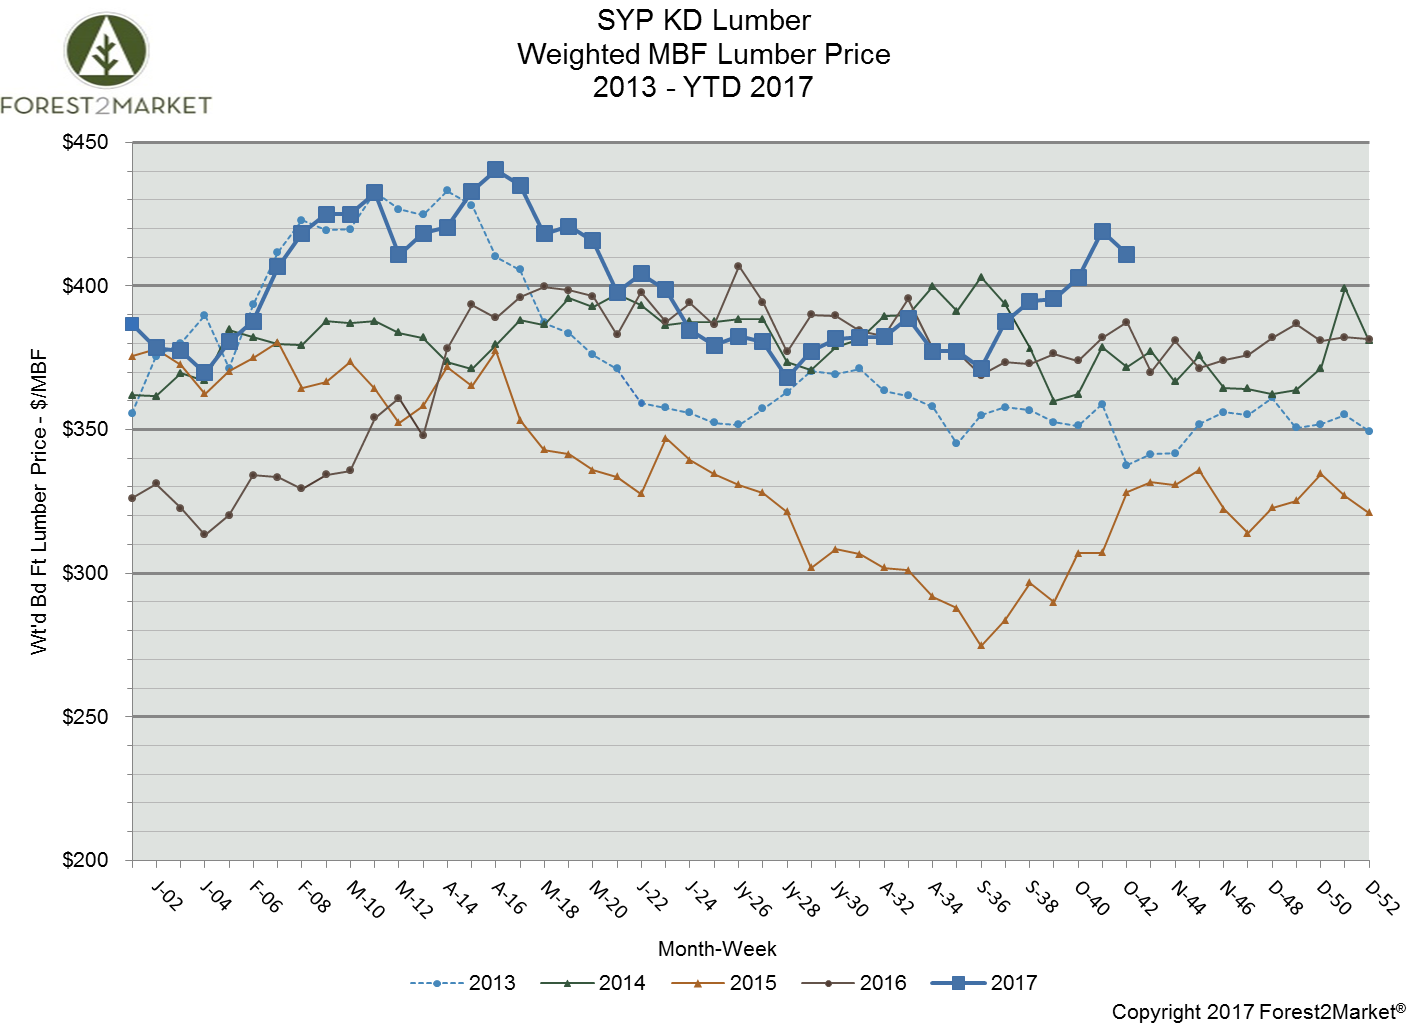 Southern Yellow Pine Lumber Prices Remain High in October